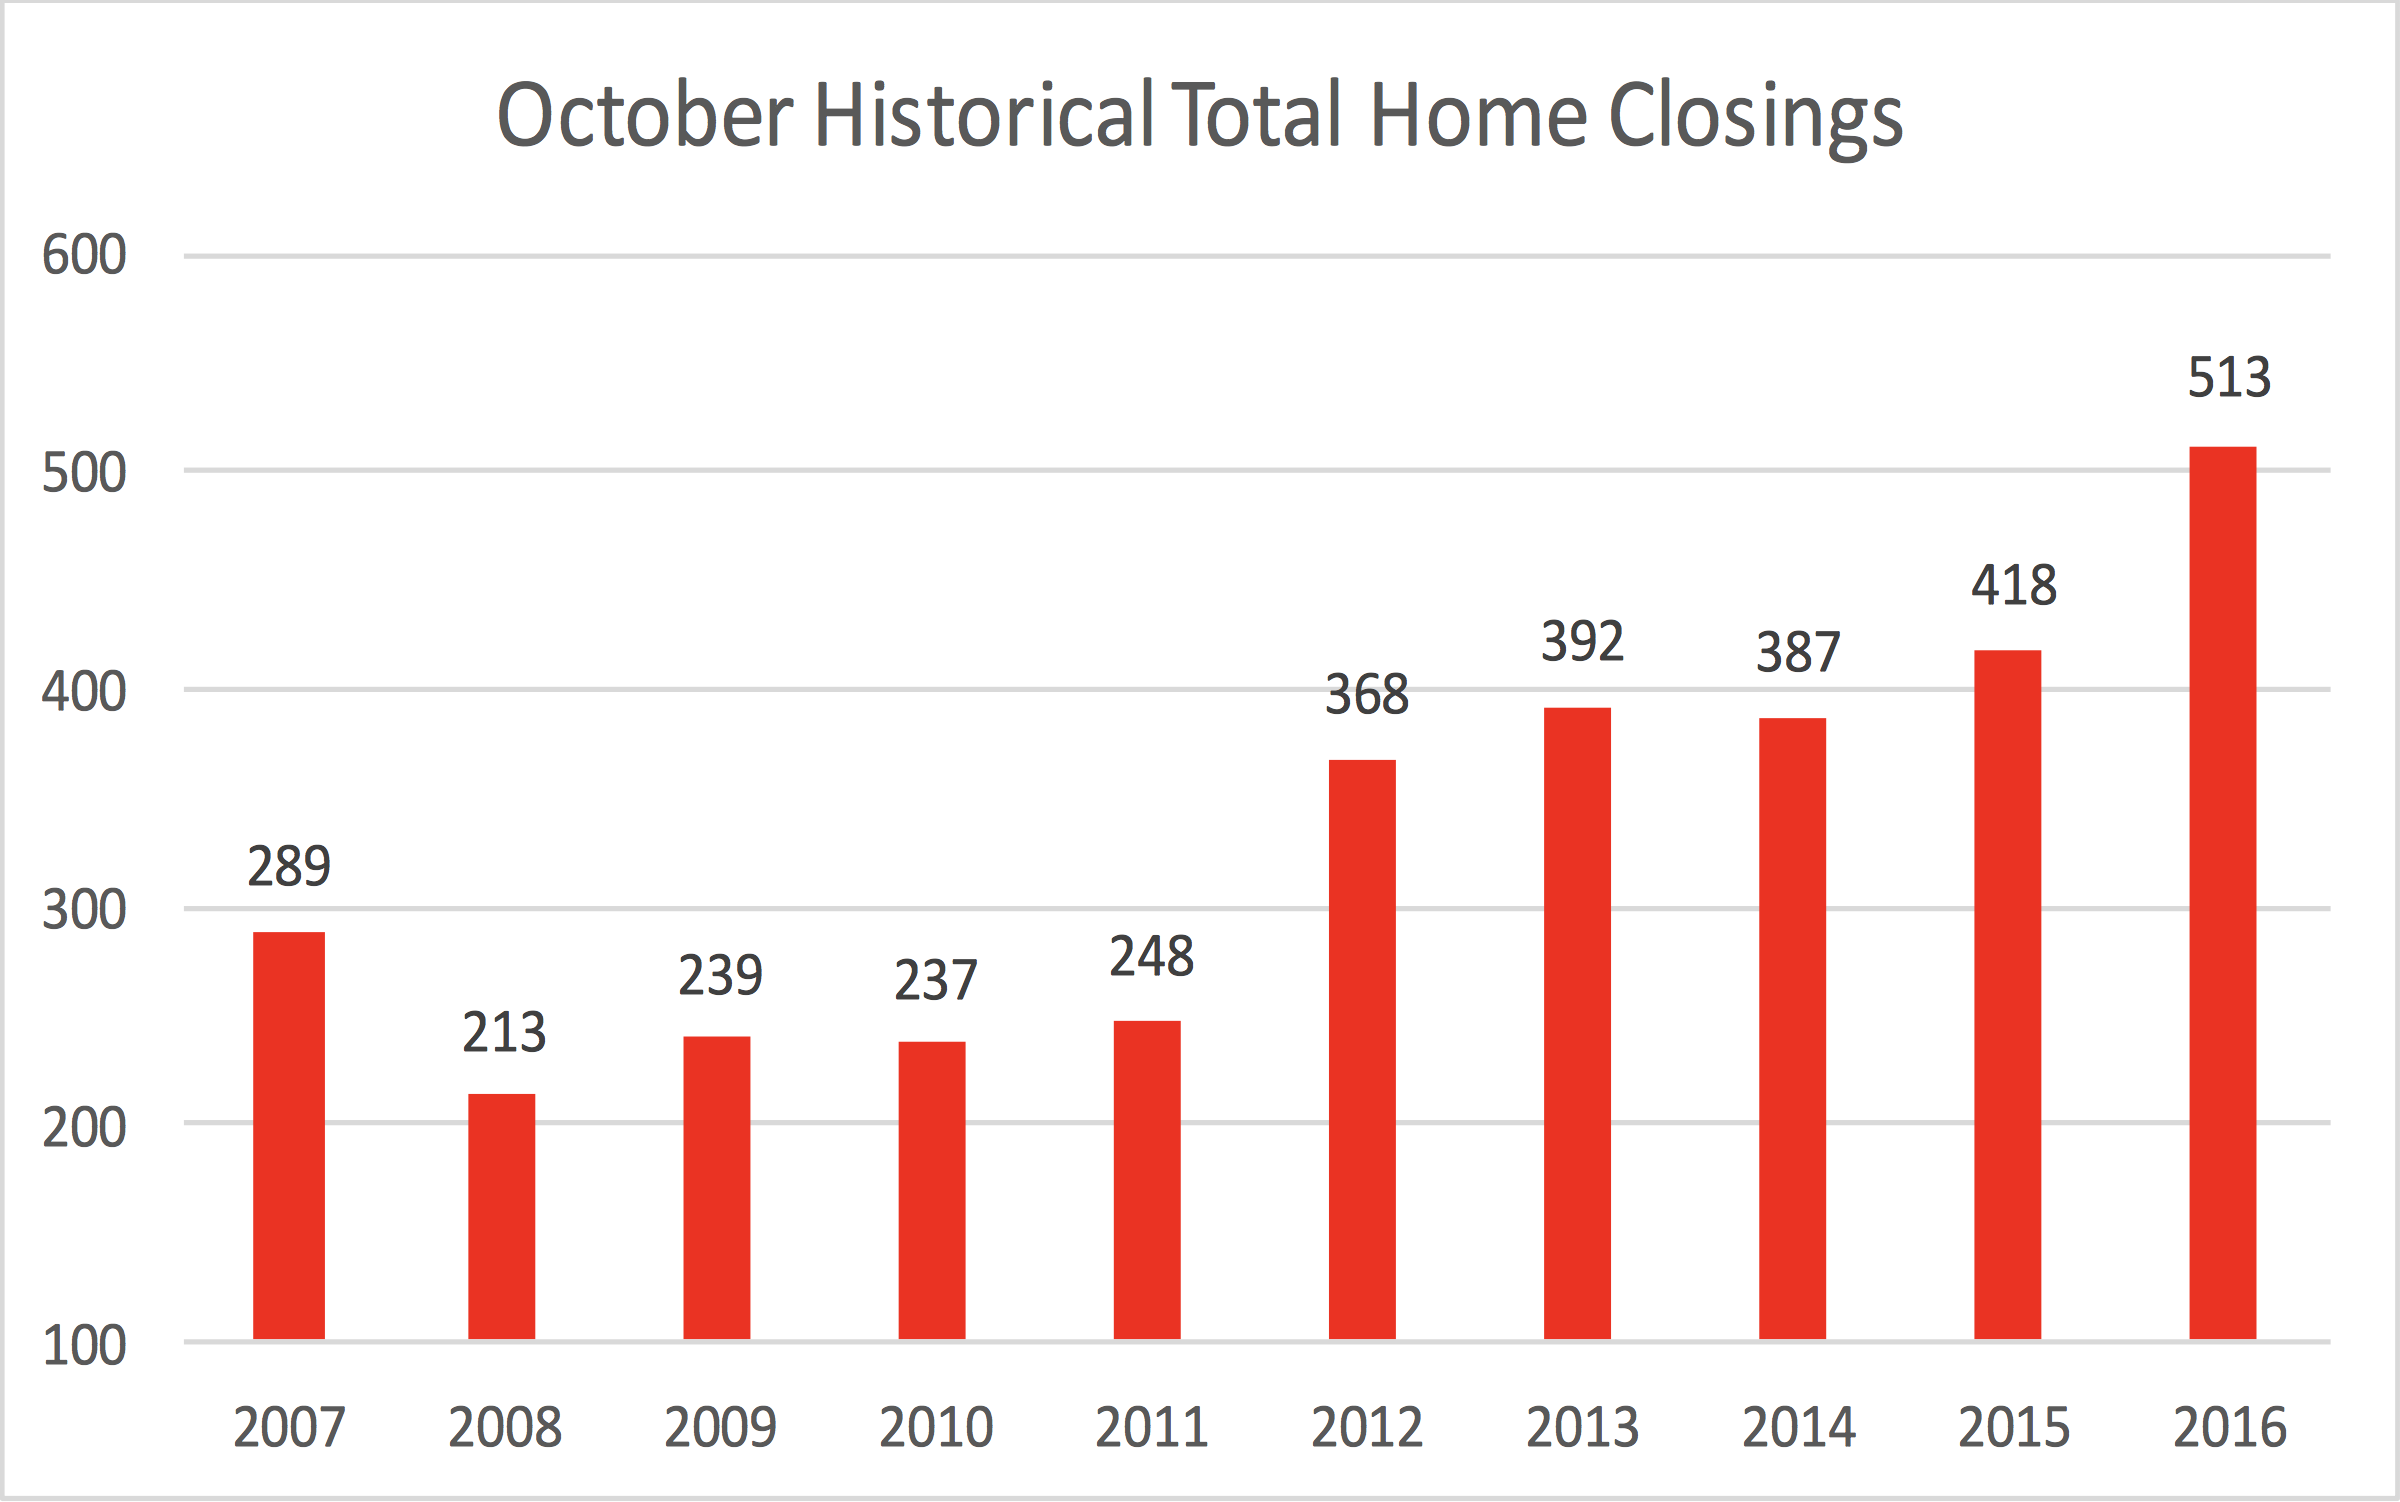 October Historical Total Home Closings in Williamson County